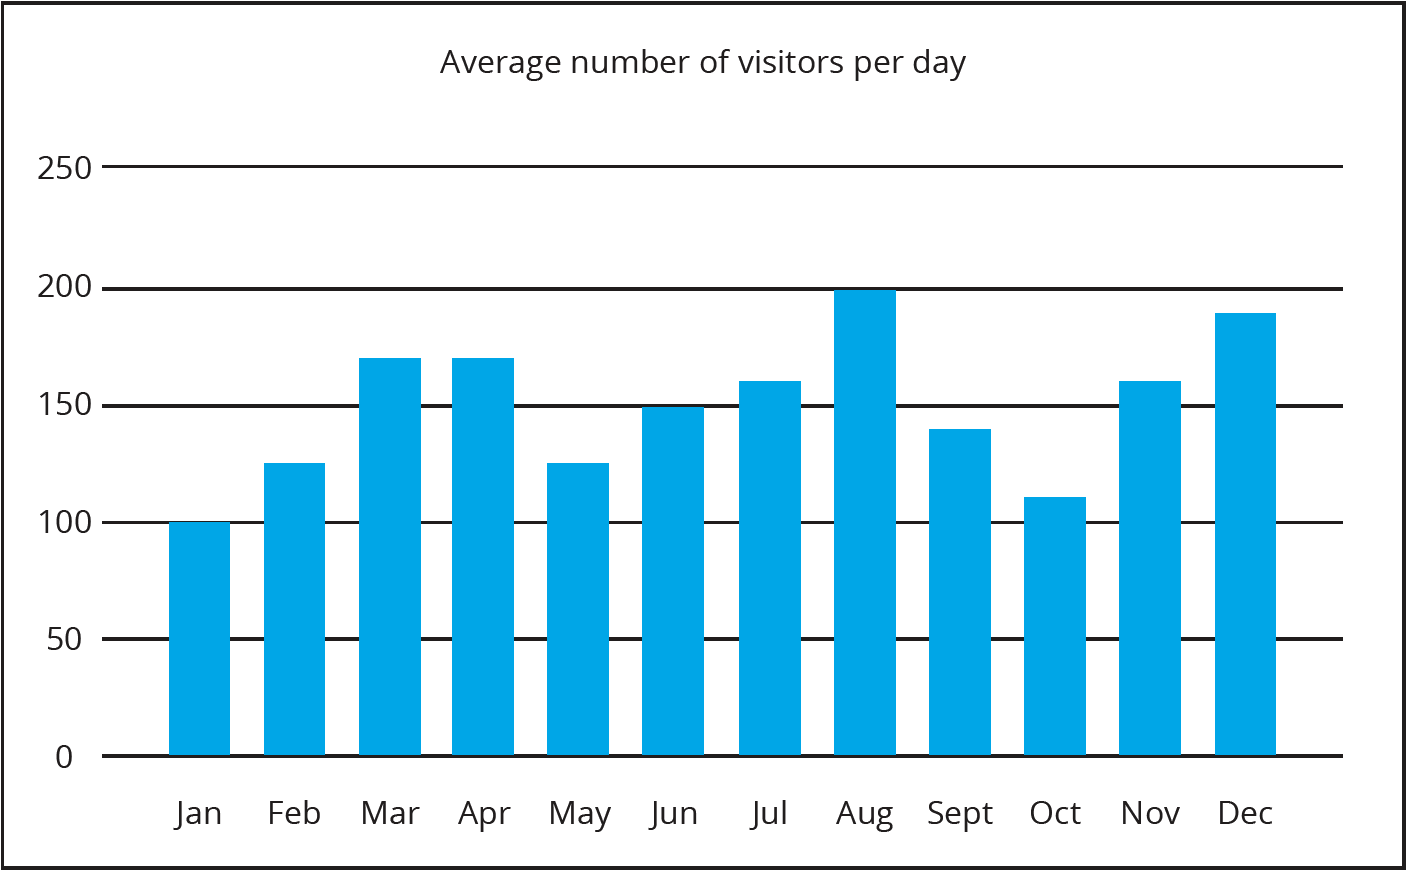 Bar chart displaying the average number of visitors to a coffee shop per day for each month of a 12 month period. 